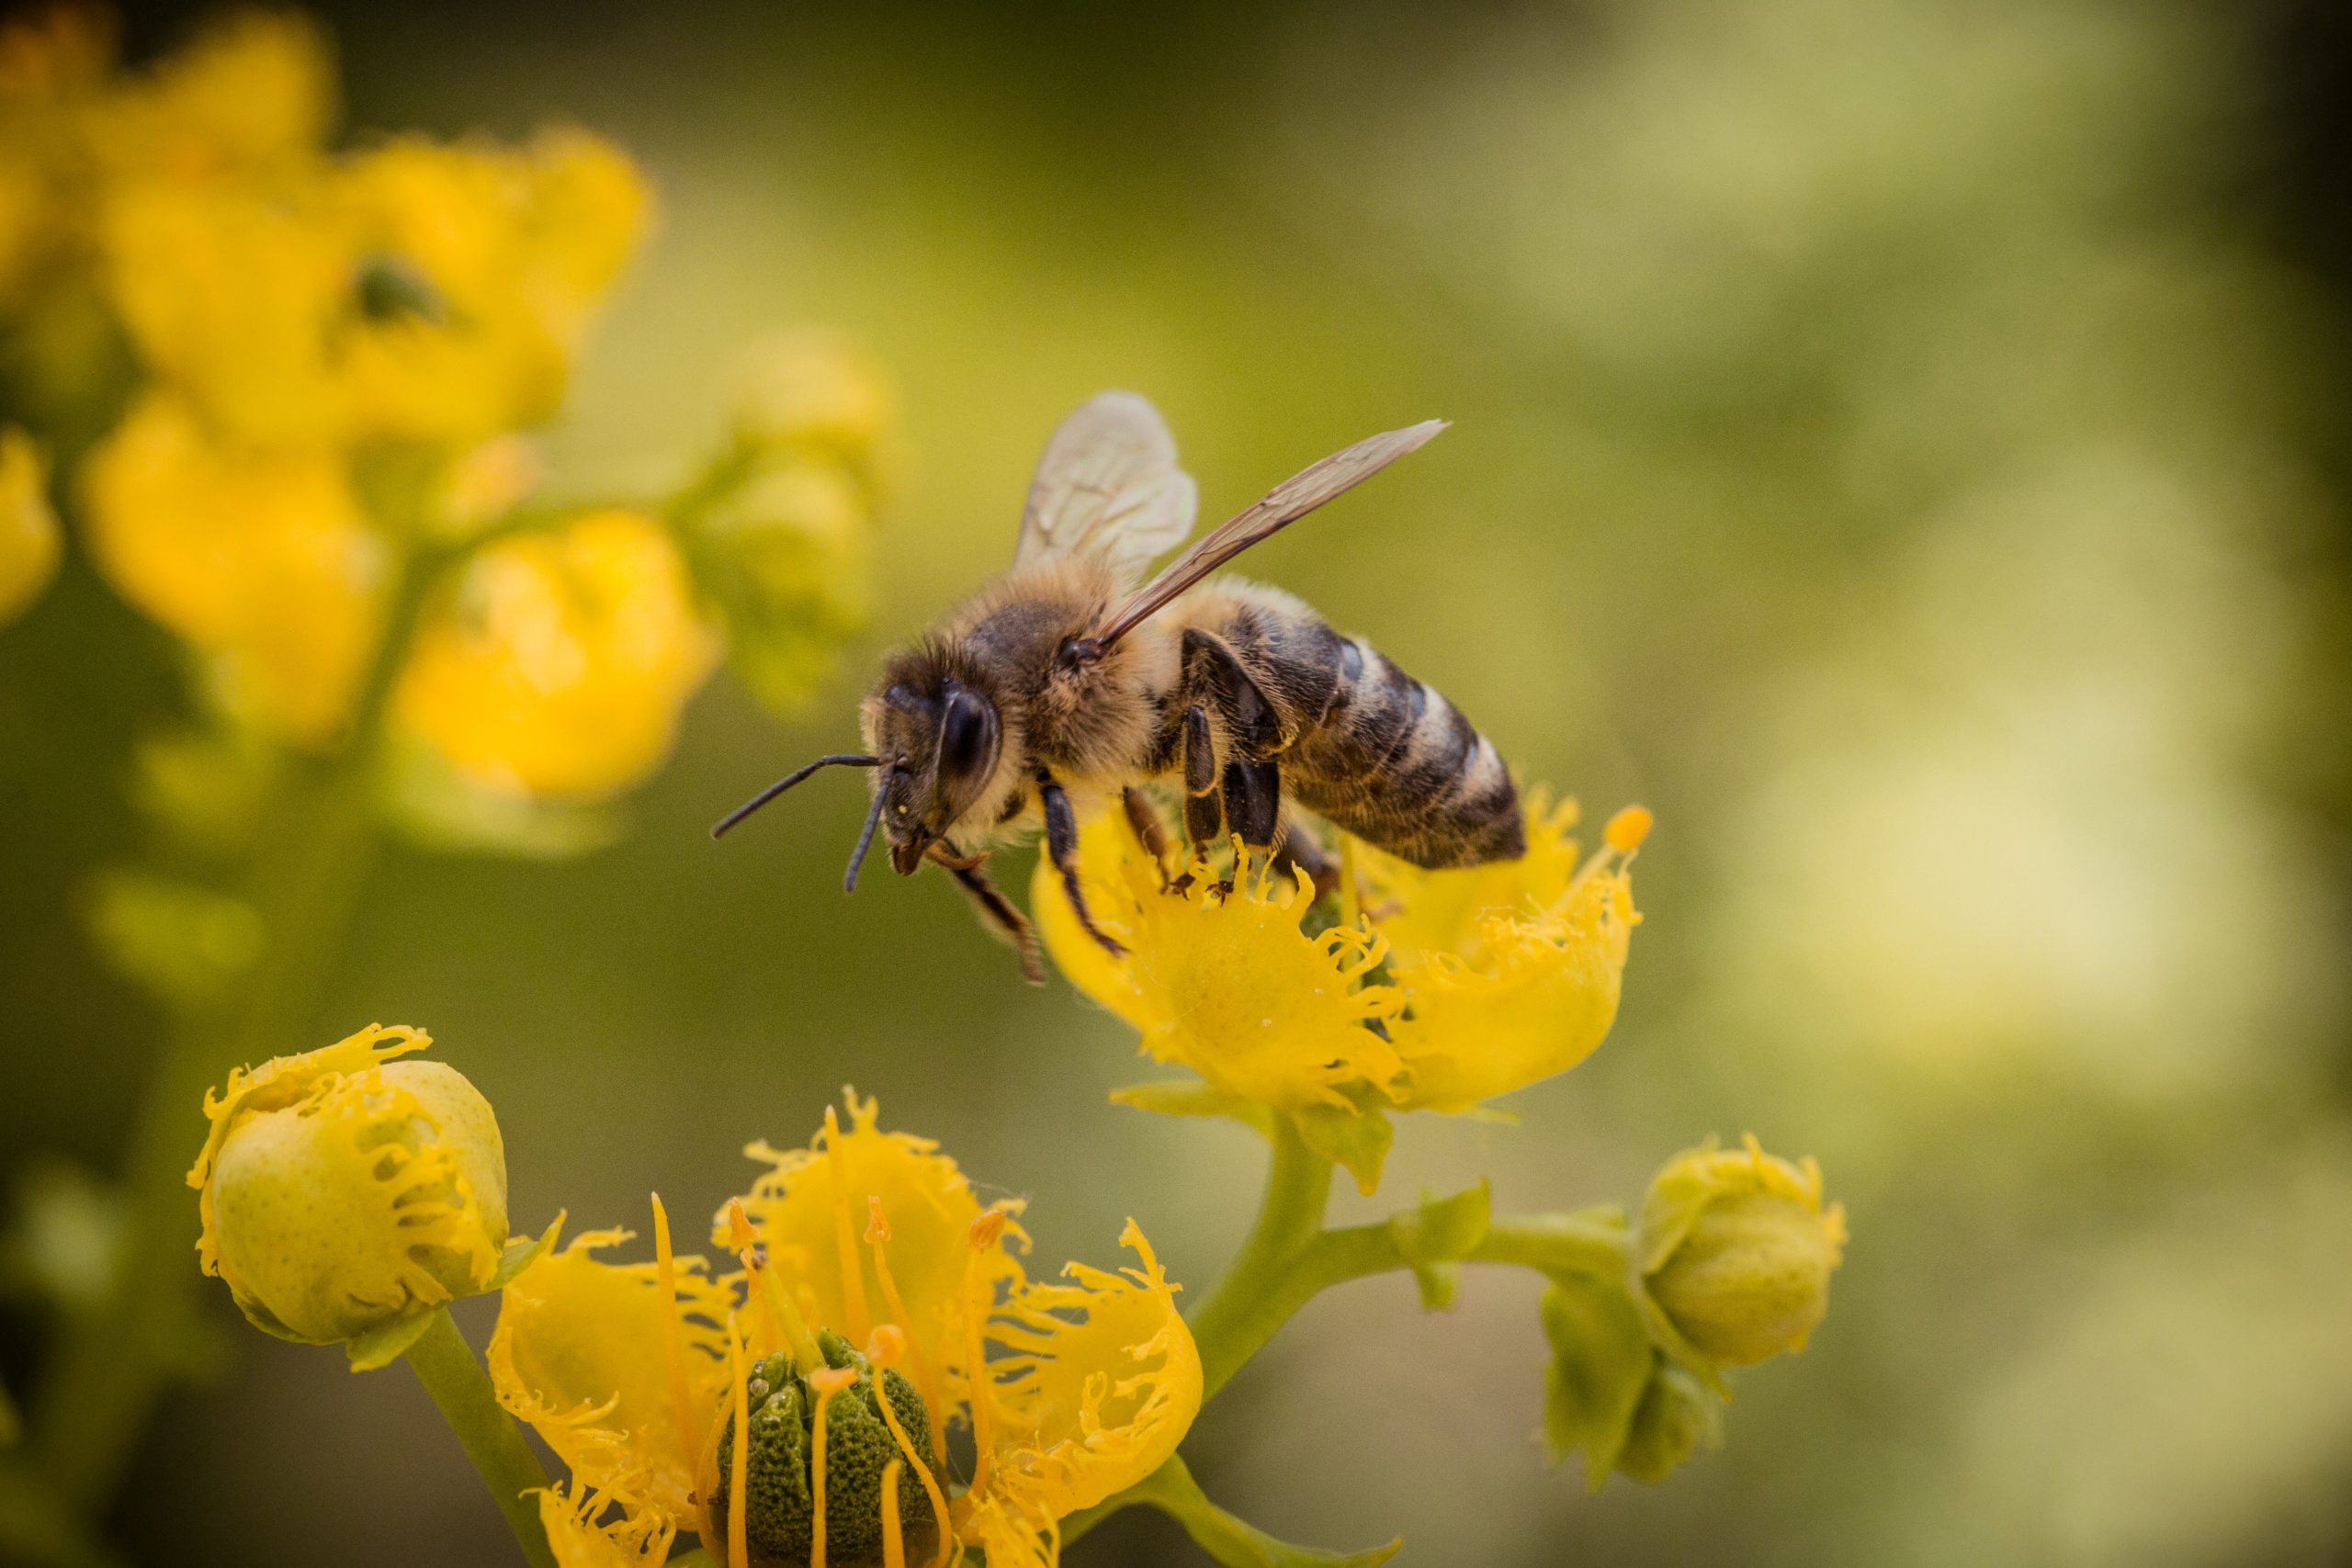 Top Tips for Removing Bees